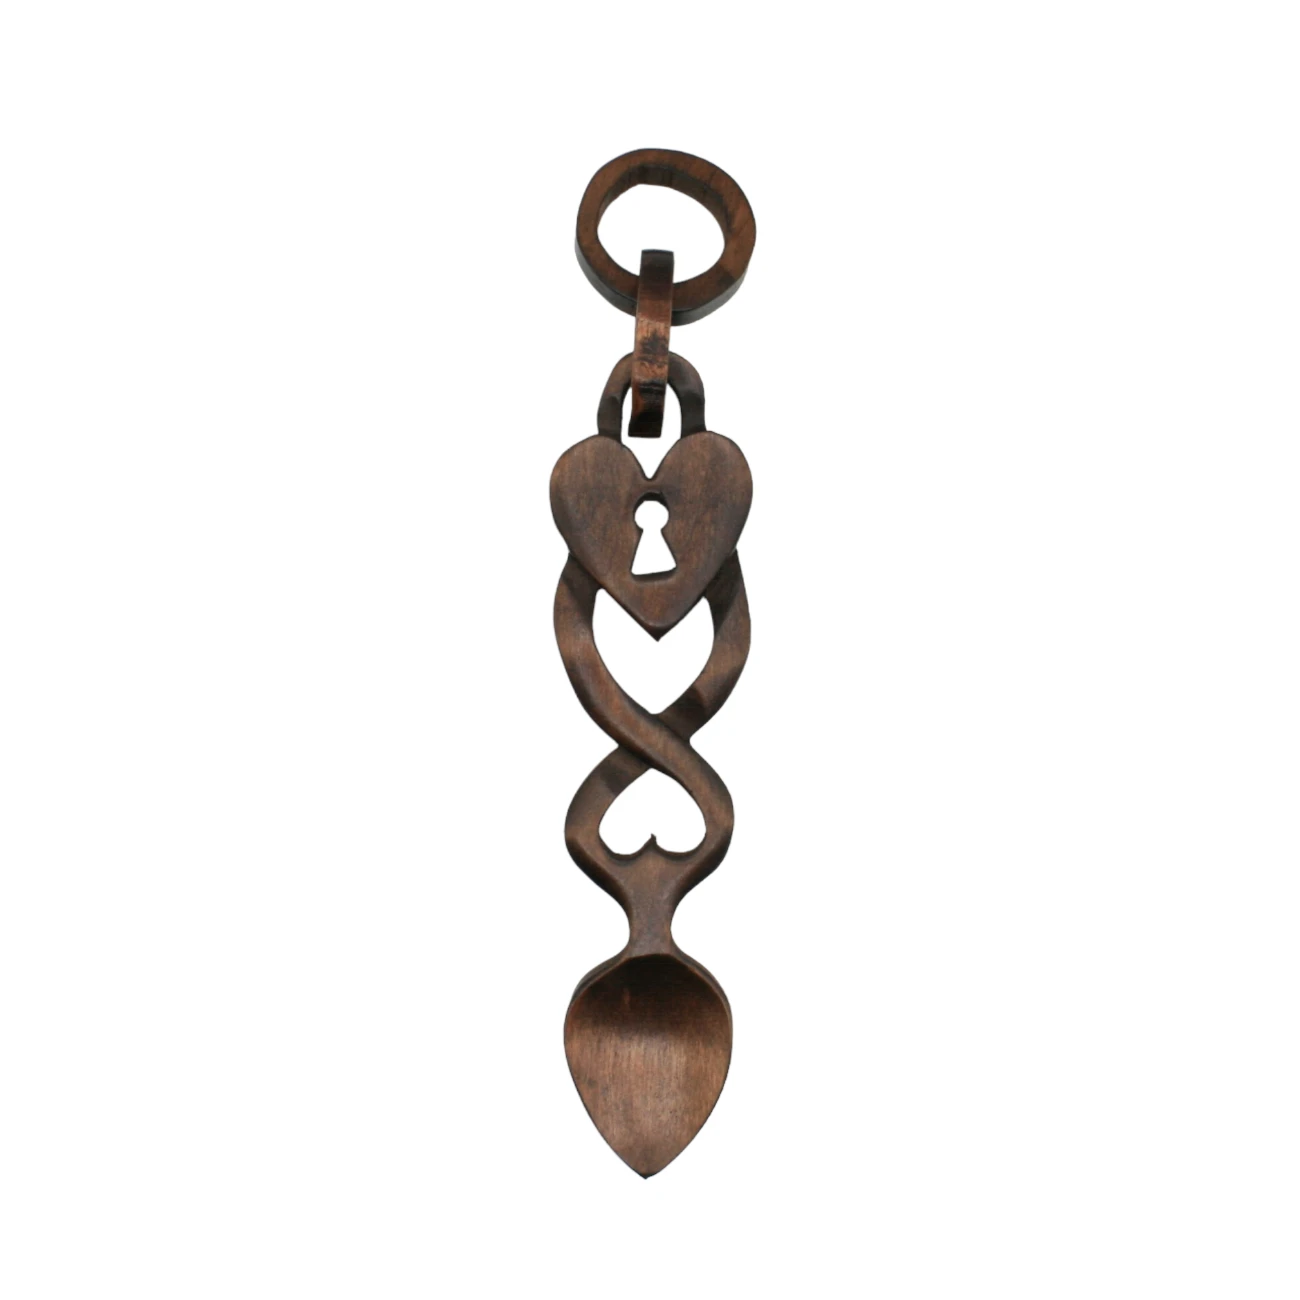 An image of a lovespoon titled Heart Lock & Chain